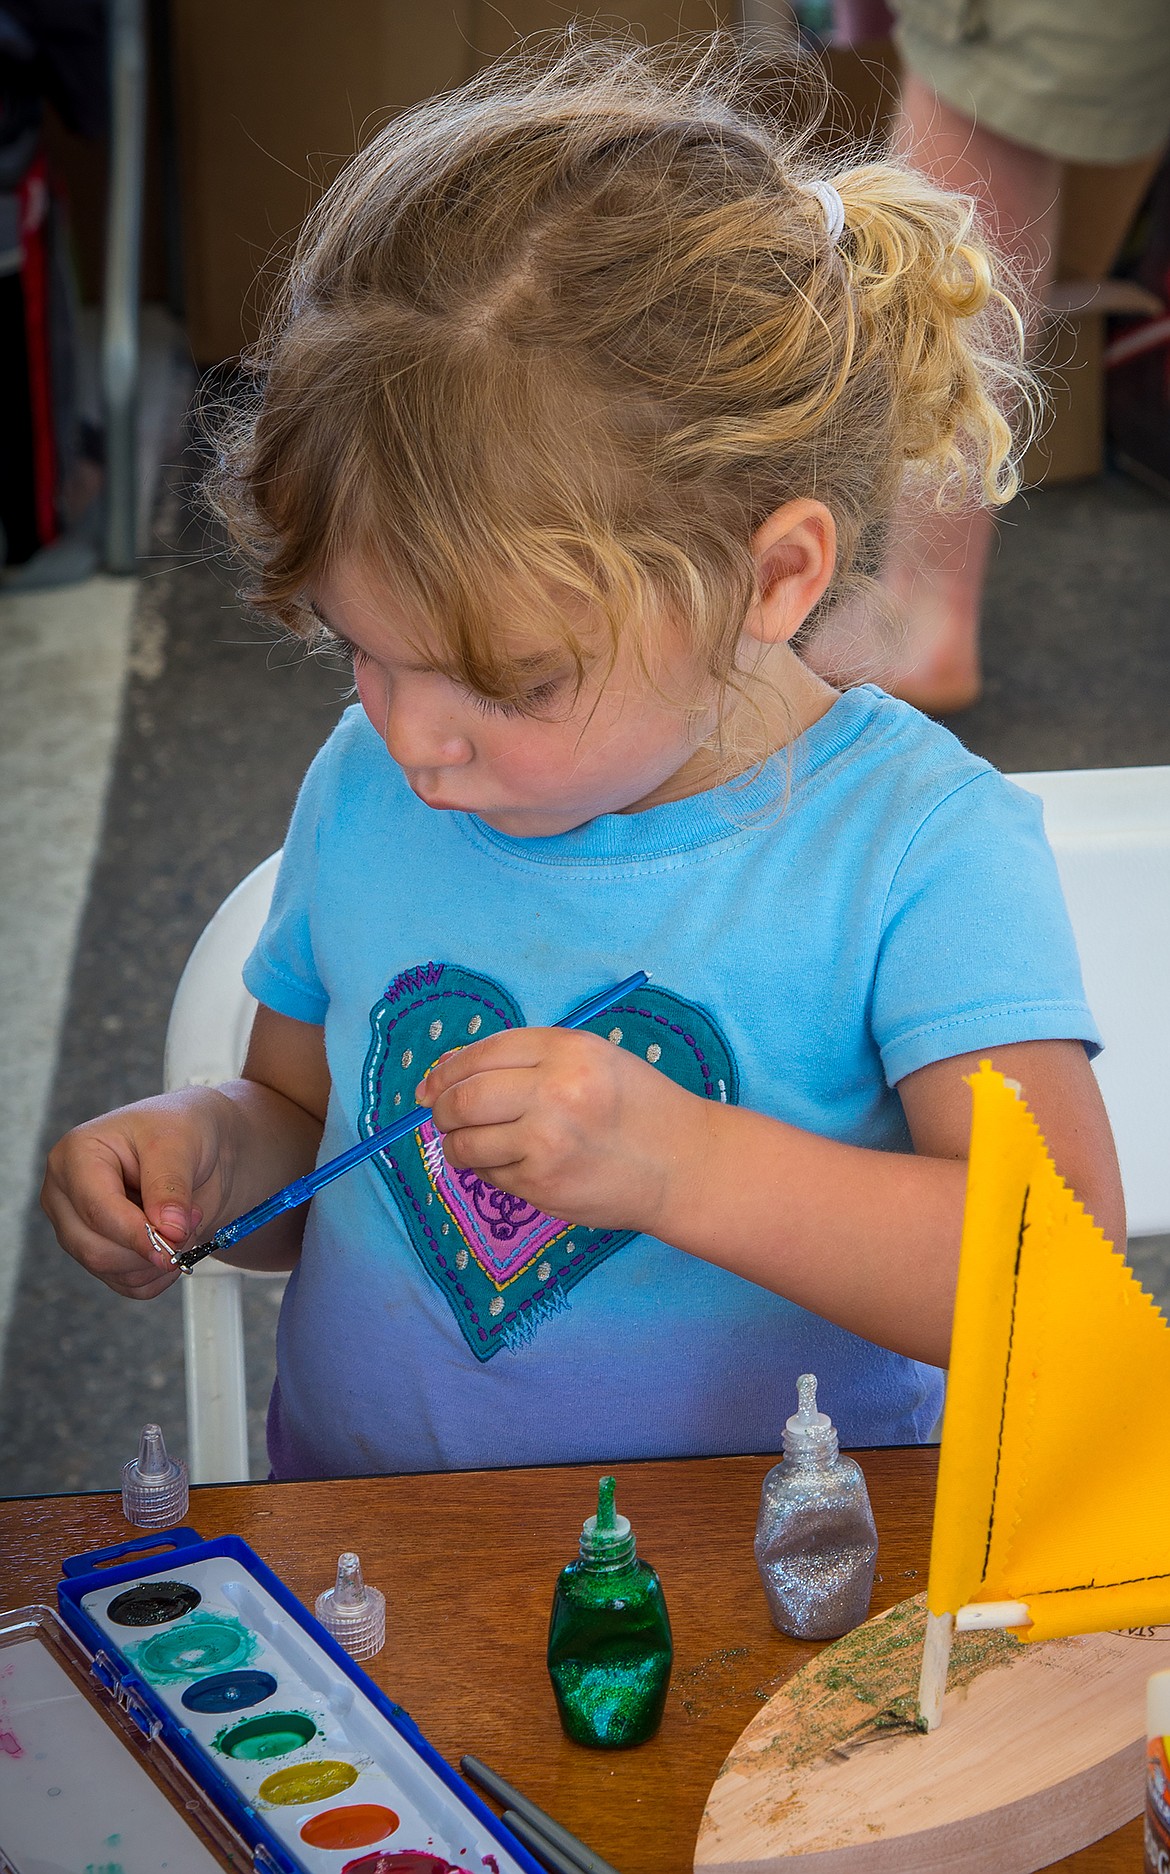 A youngster concentrates as she works to decorate the small wooden boat she was building as part of a Sandpoint Boat Show children's boat building event.